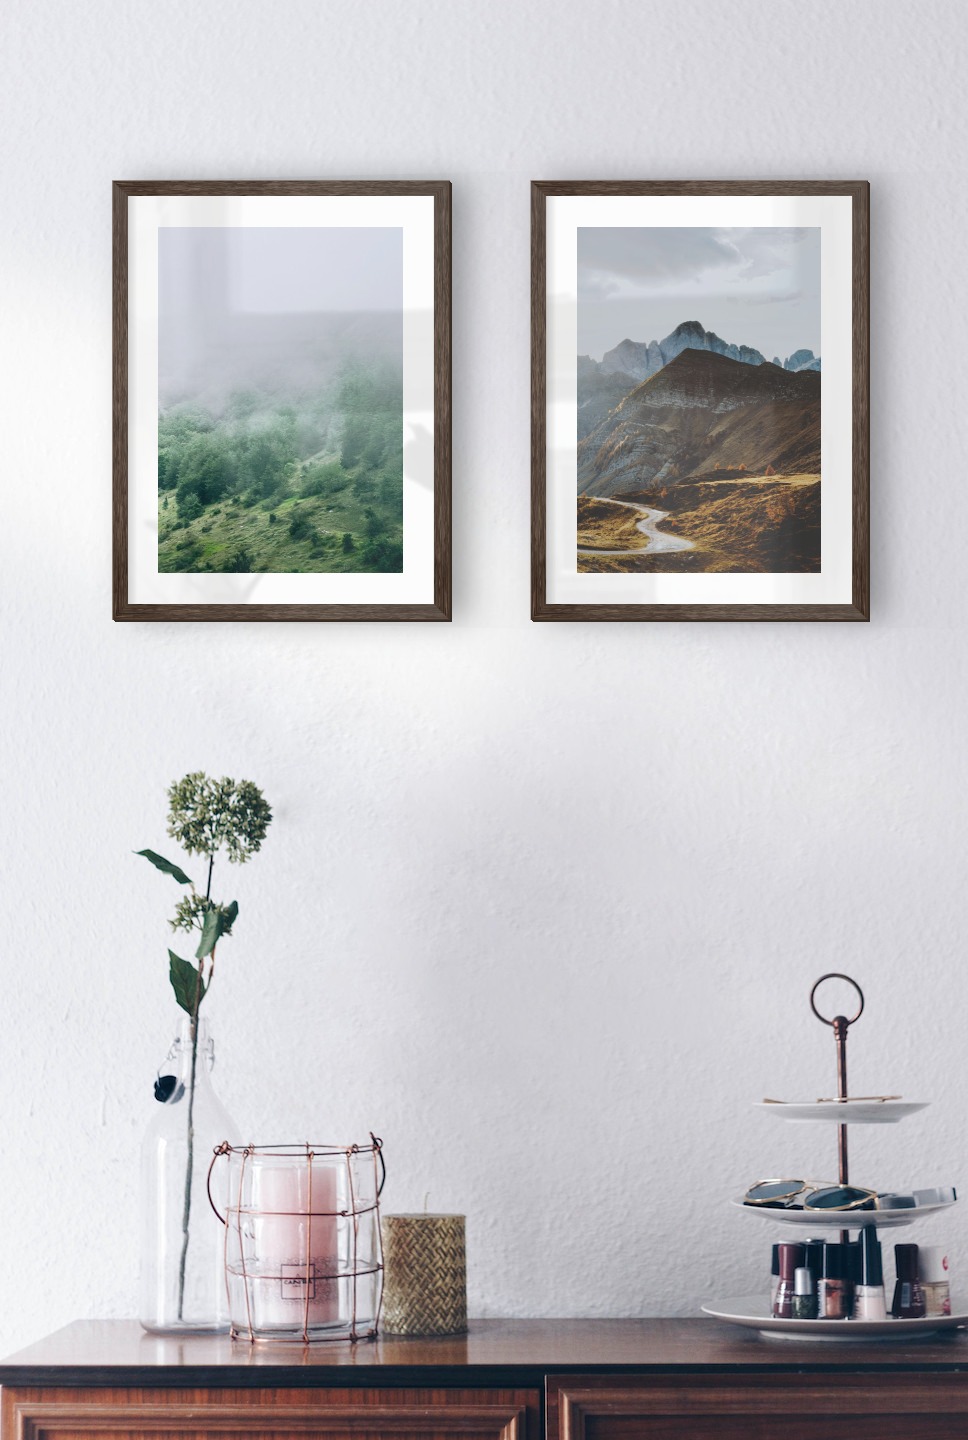 Gallery wall with picture frames in dark wood in sizes 30x40 with prints "Slope with trees" and "Road among the mountains"